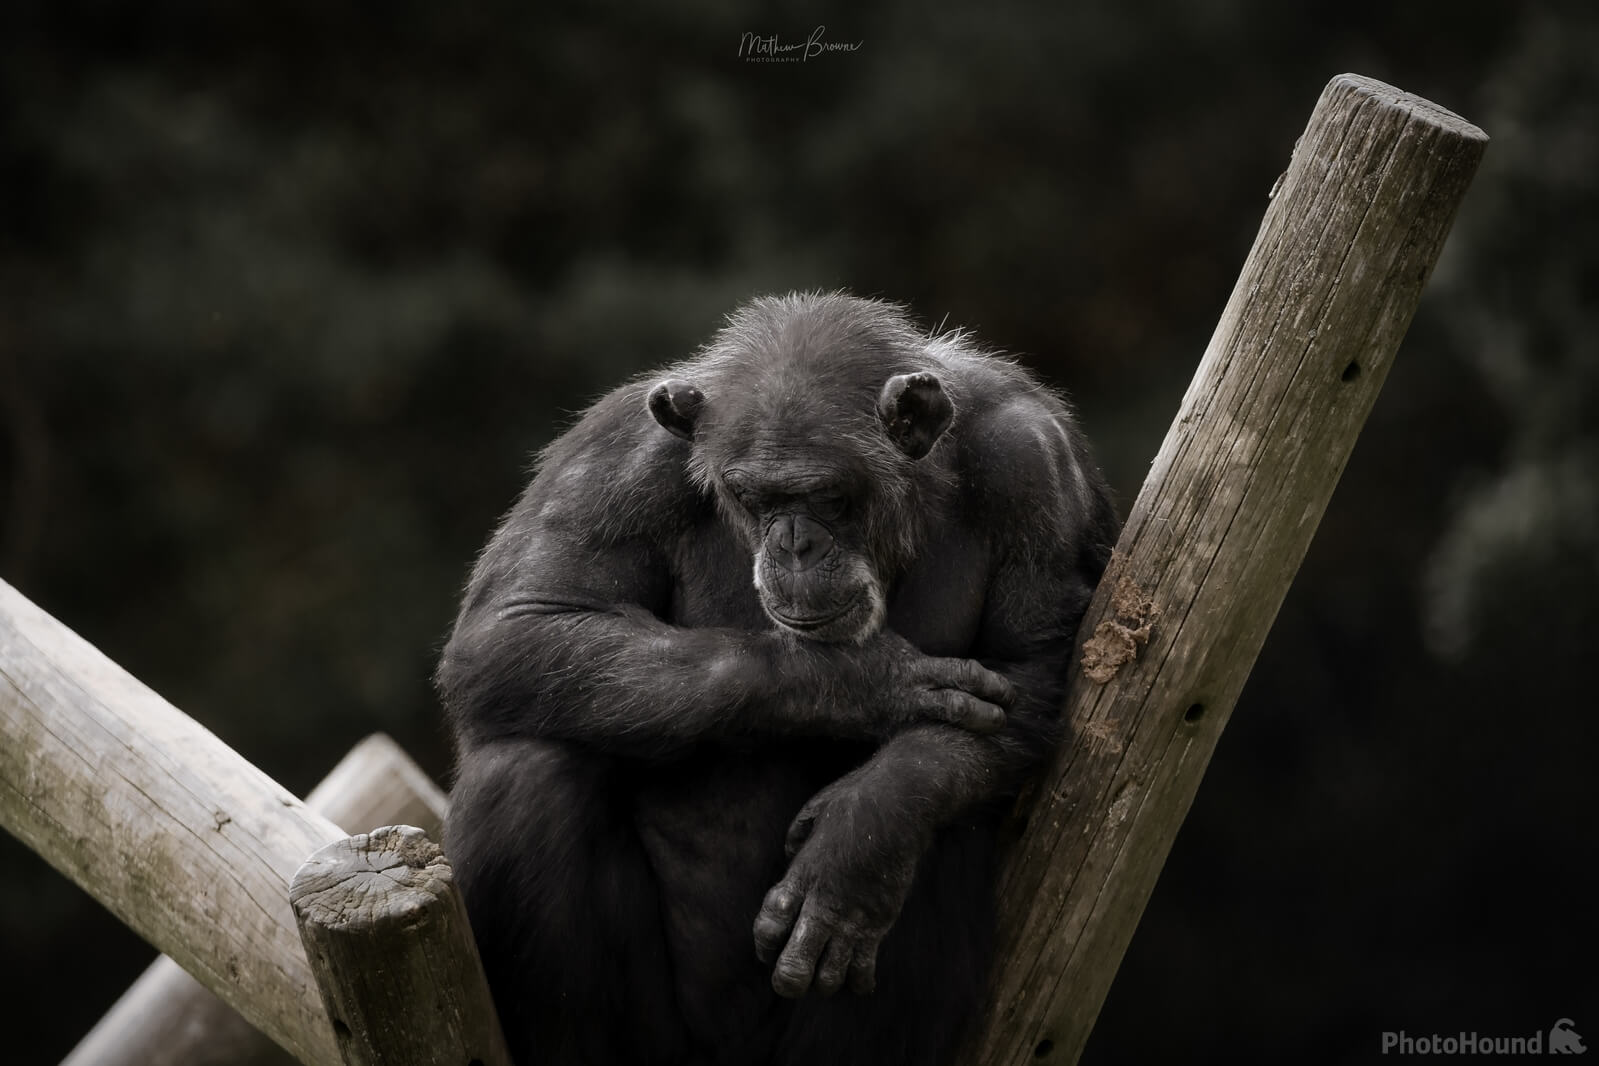 Image of Welsh Mountain Zoo by Mathew Browne